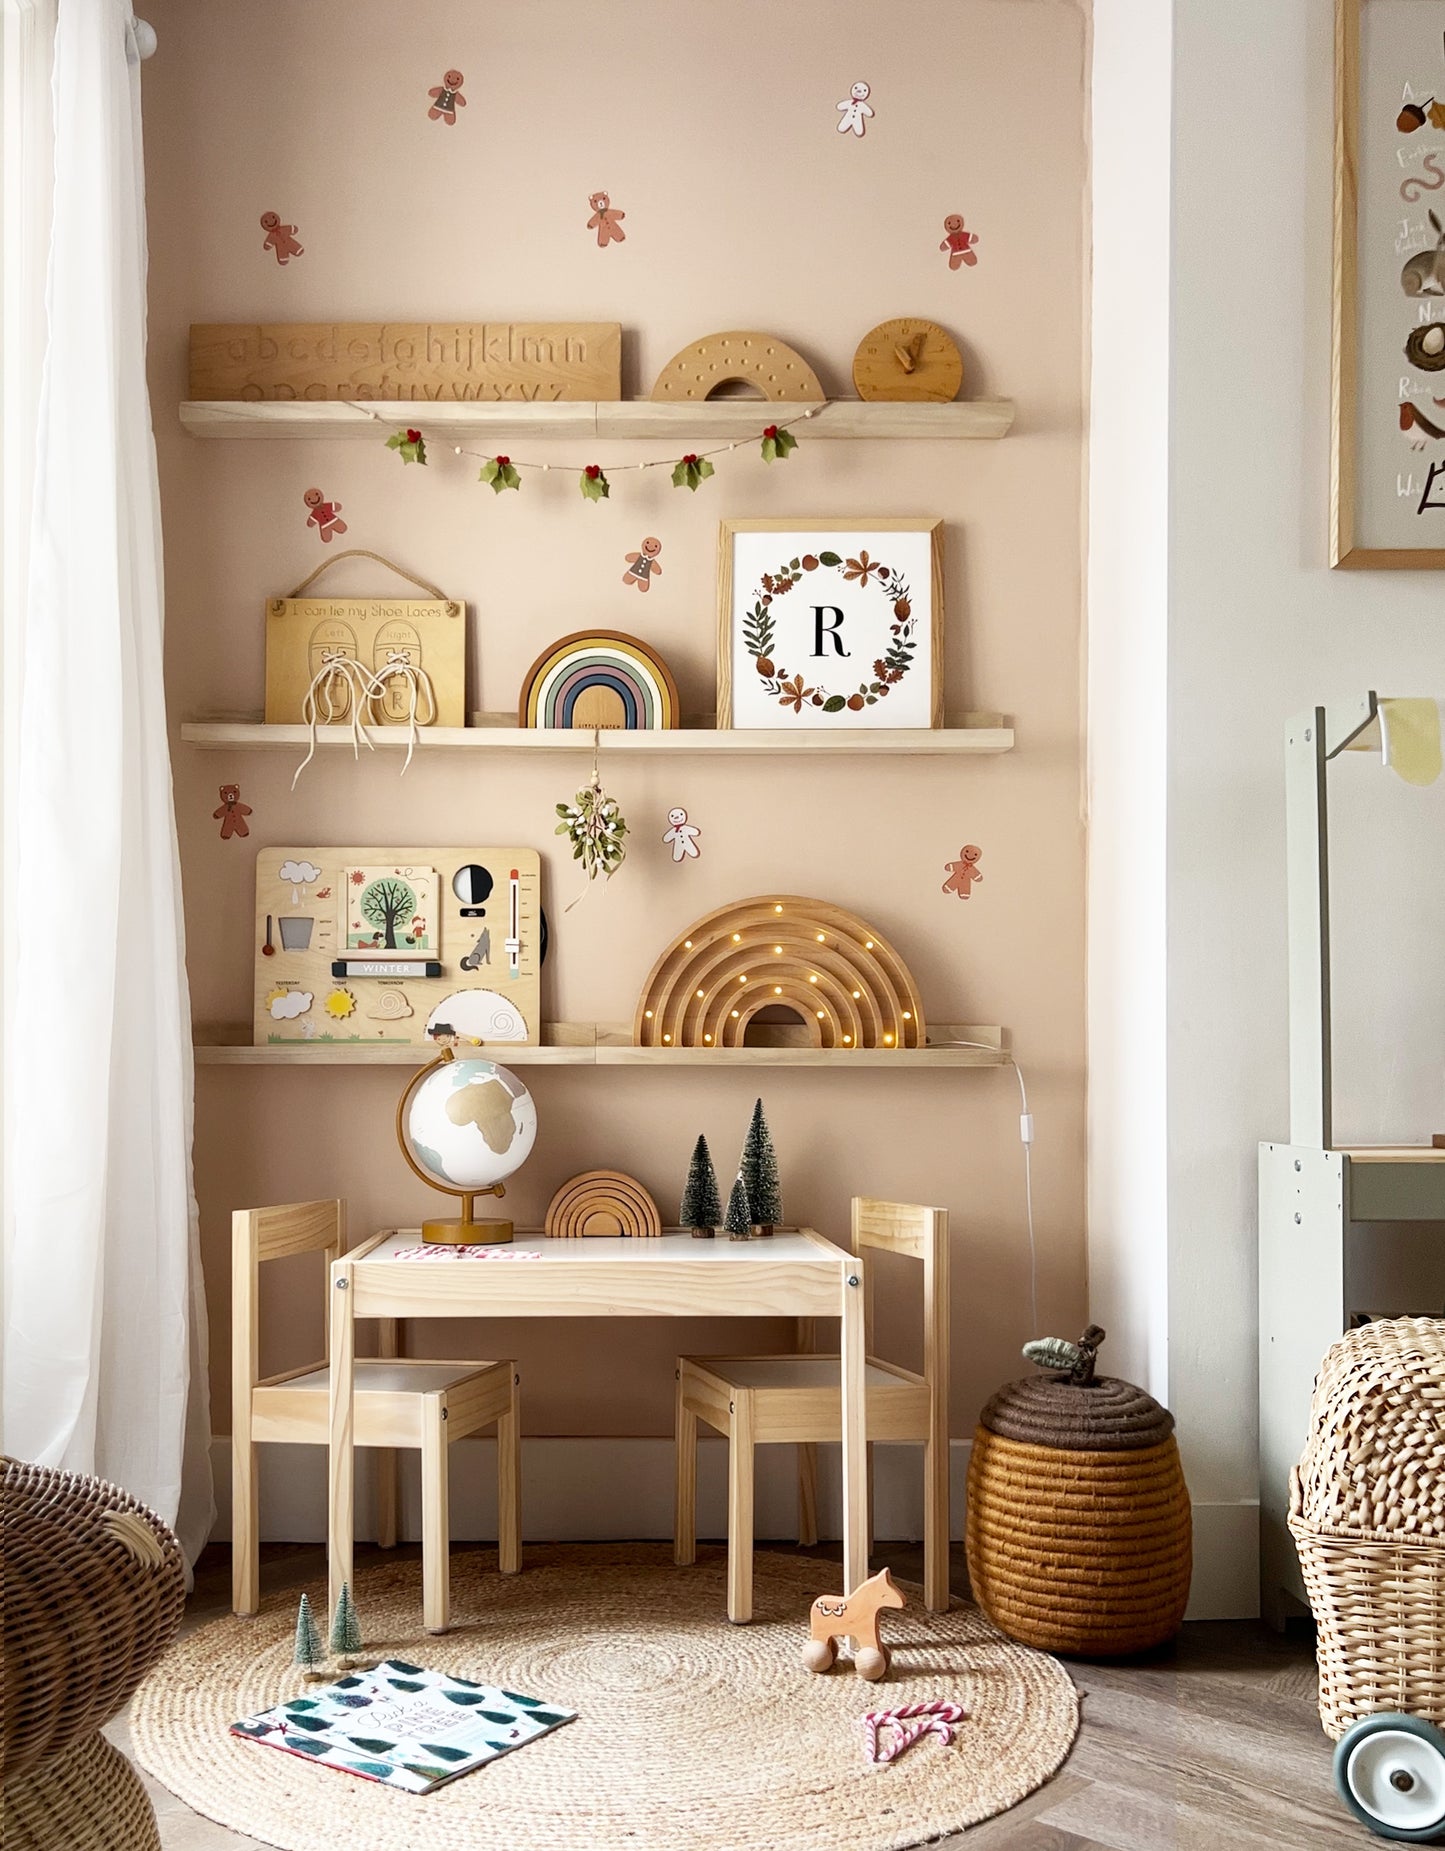 Gingerbread / Fabric Wall Stickers